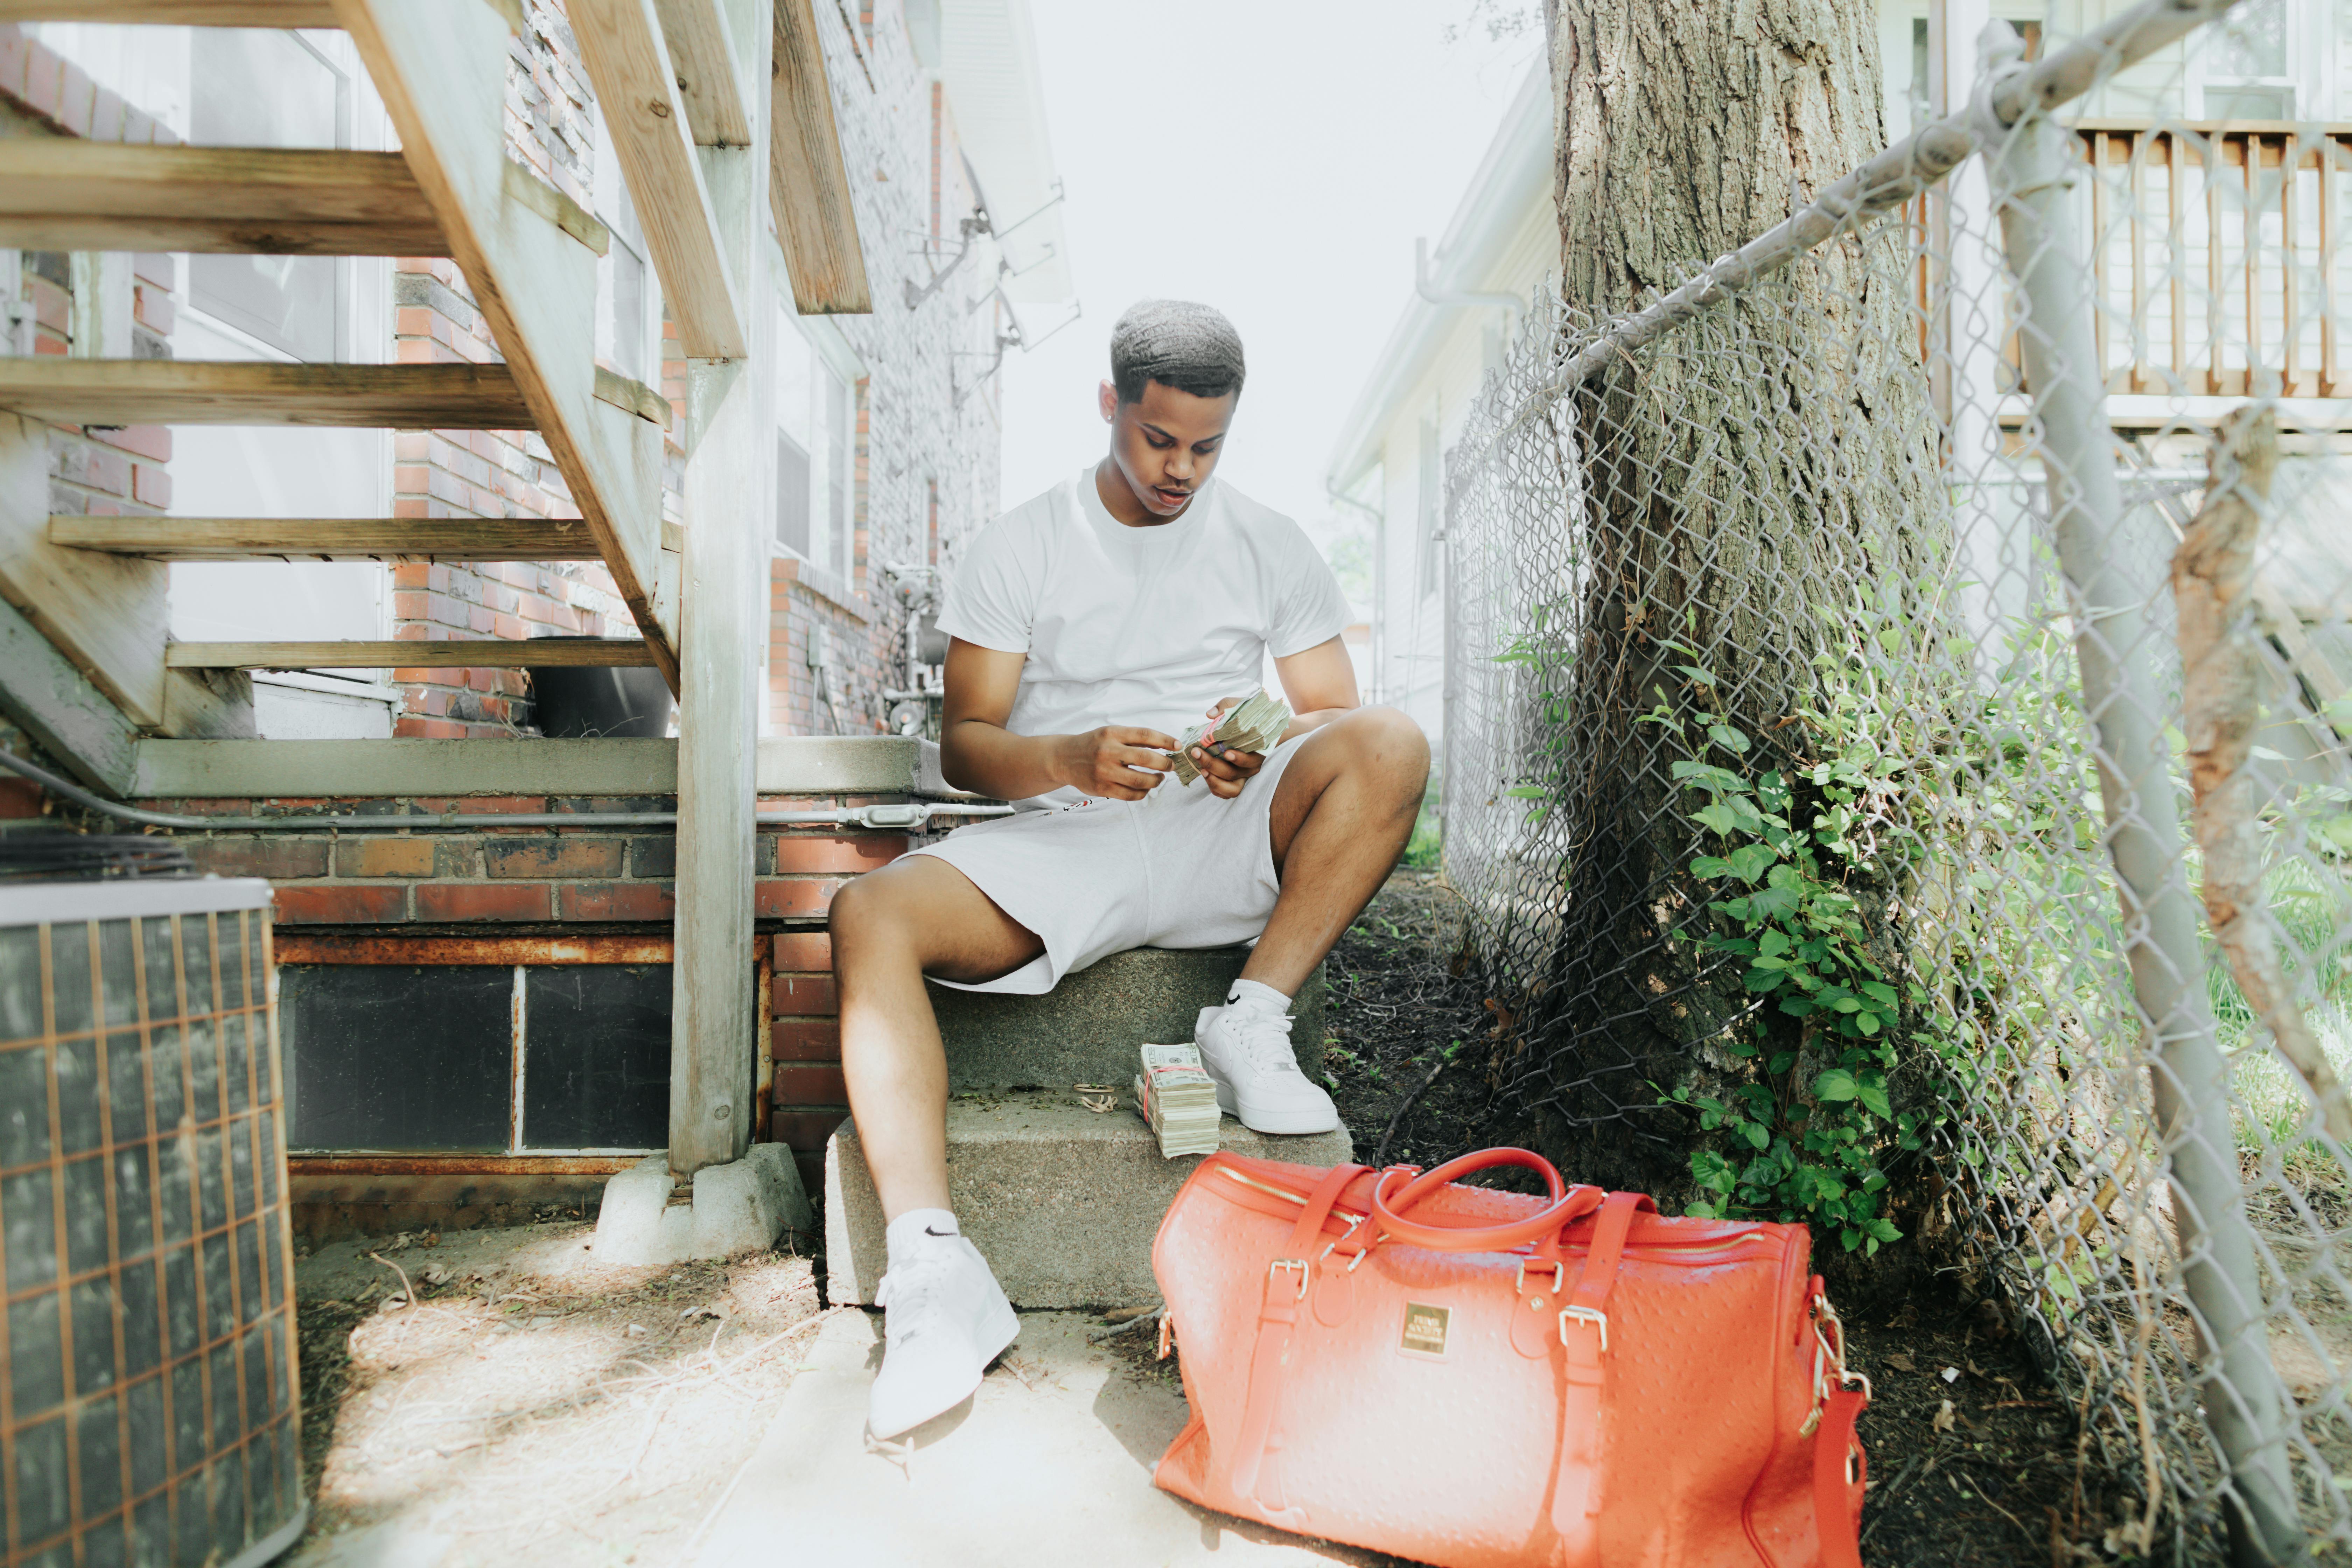 Red Supreme leather duffel bag photo – Free Person Image on Unsplash